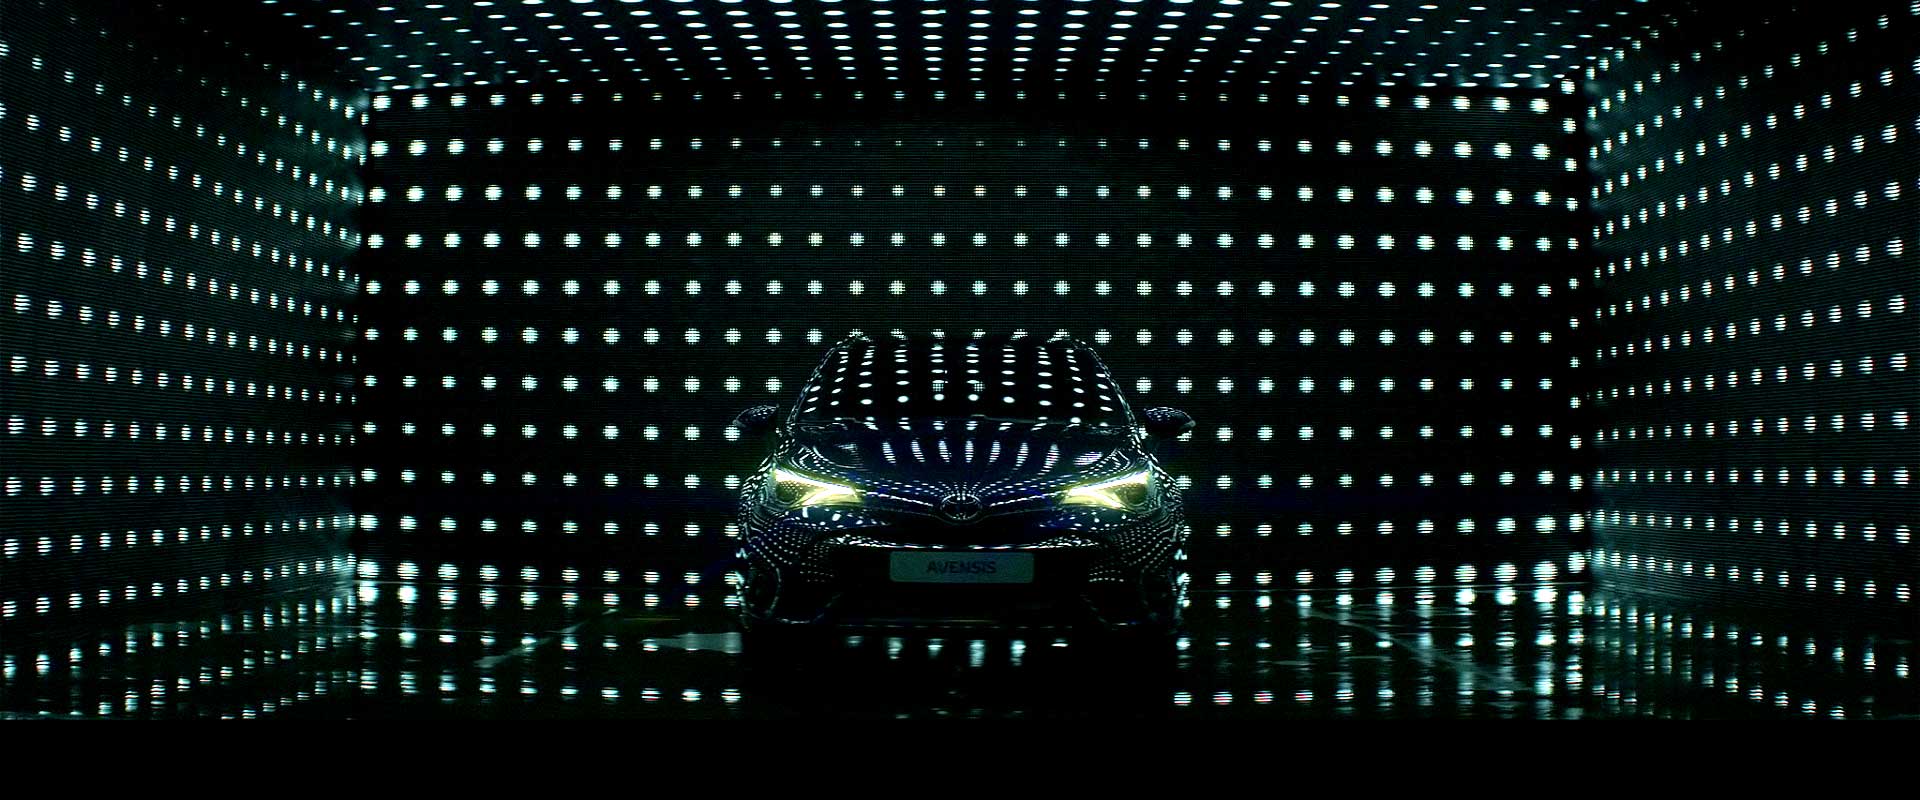 Frontview car. Still from Toyota Avensis - Commercial